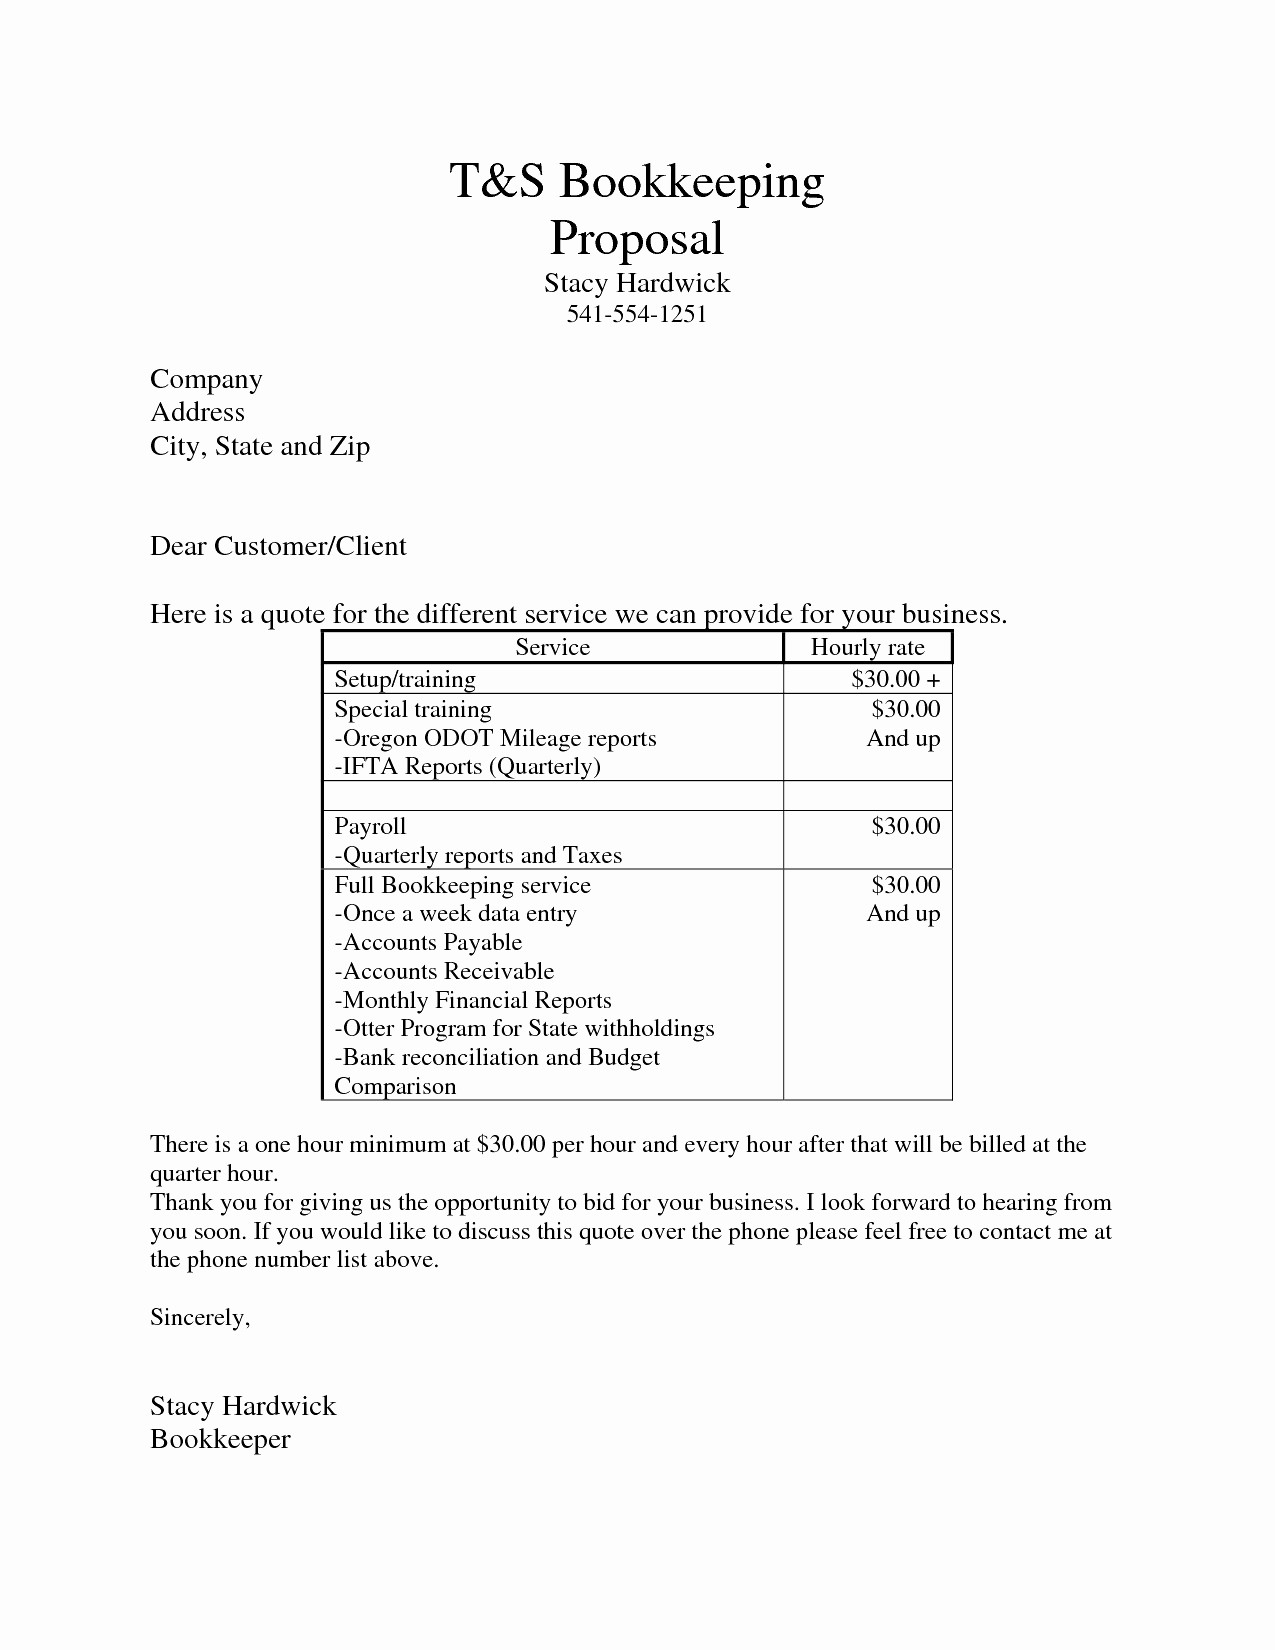 Accounting And Payroll Services Proposal Beautiful 50 Elegant Image Document